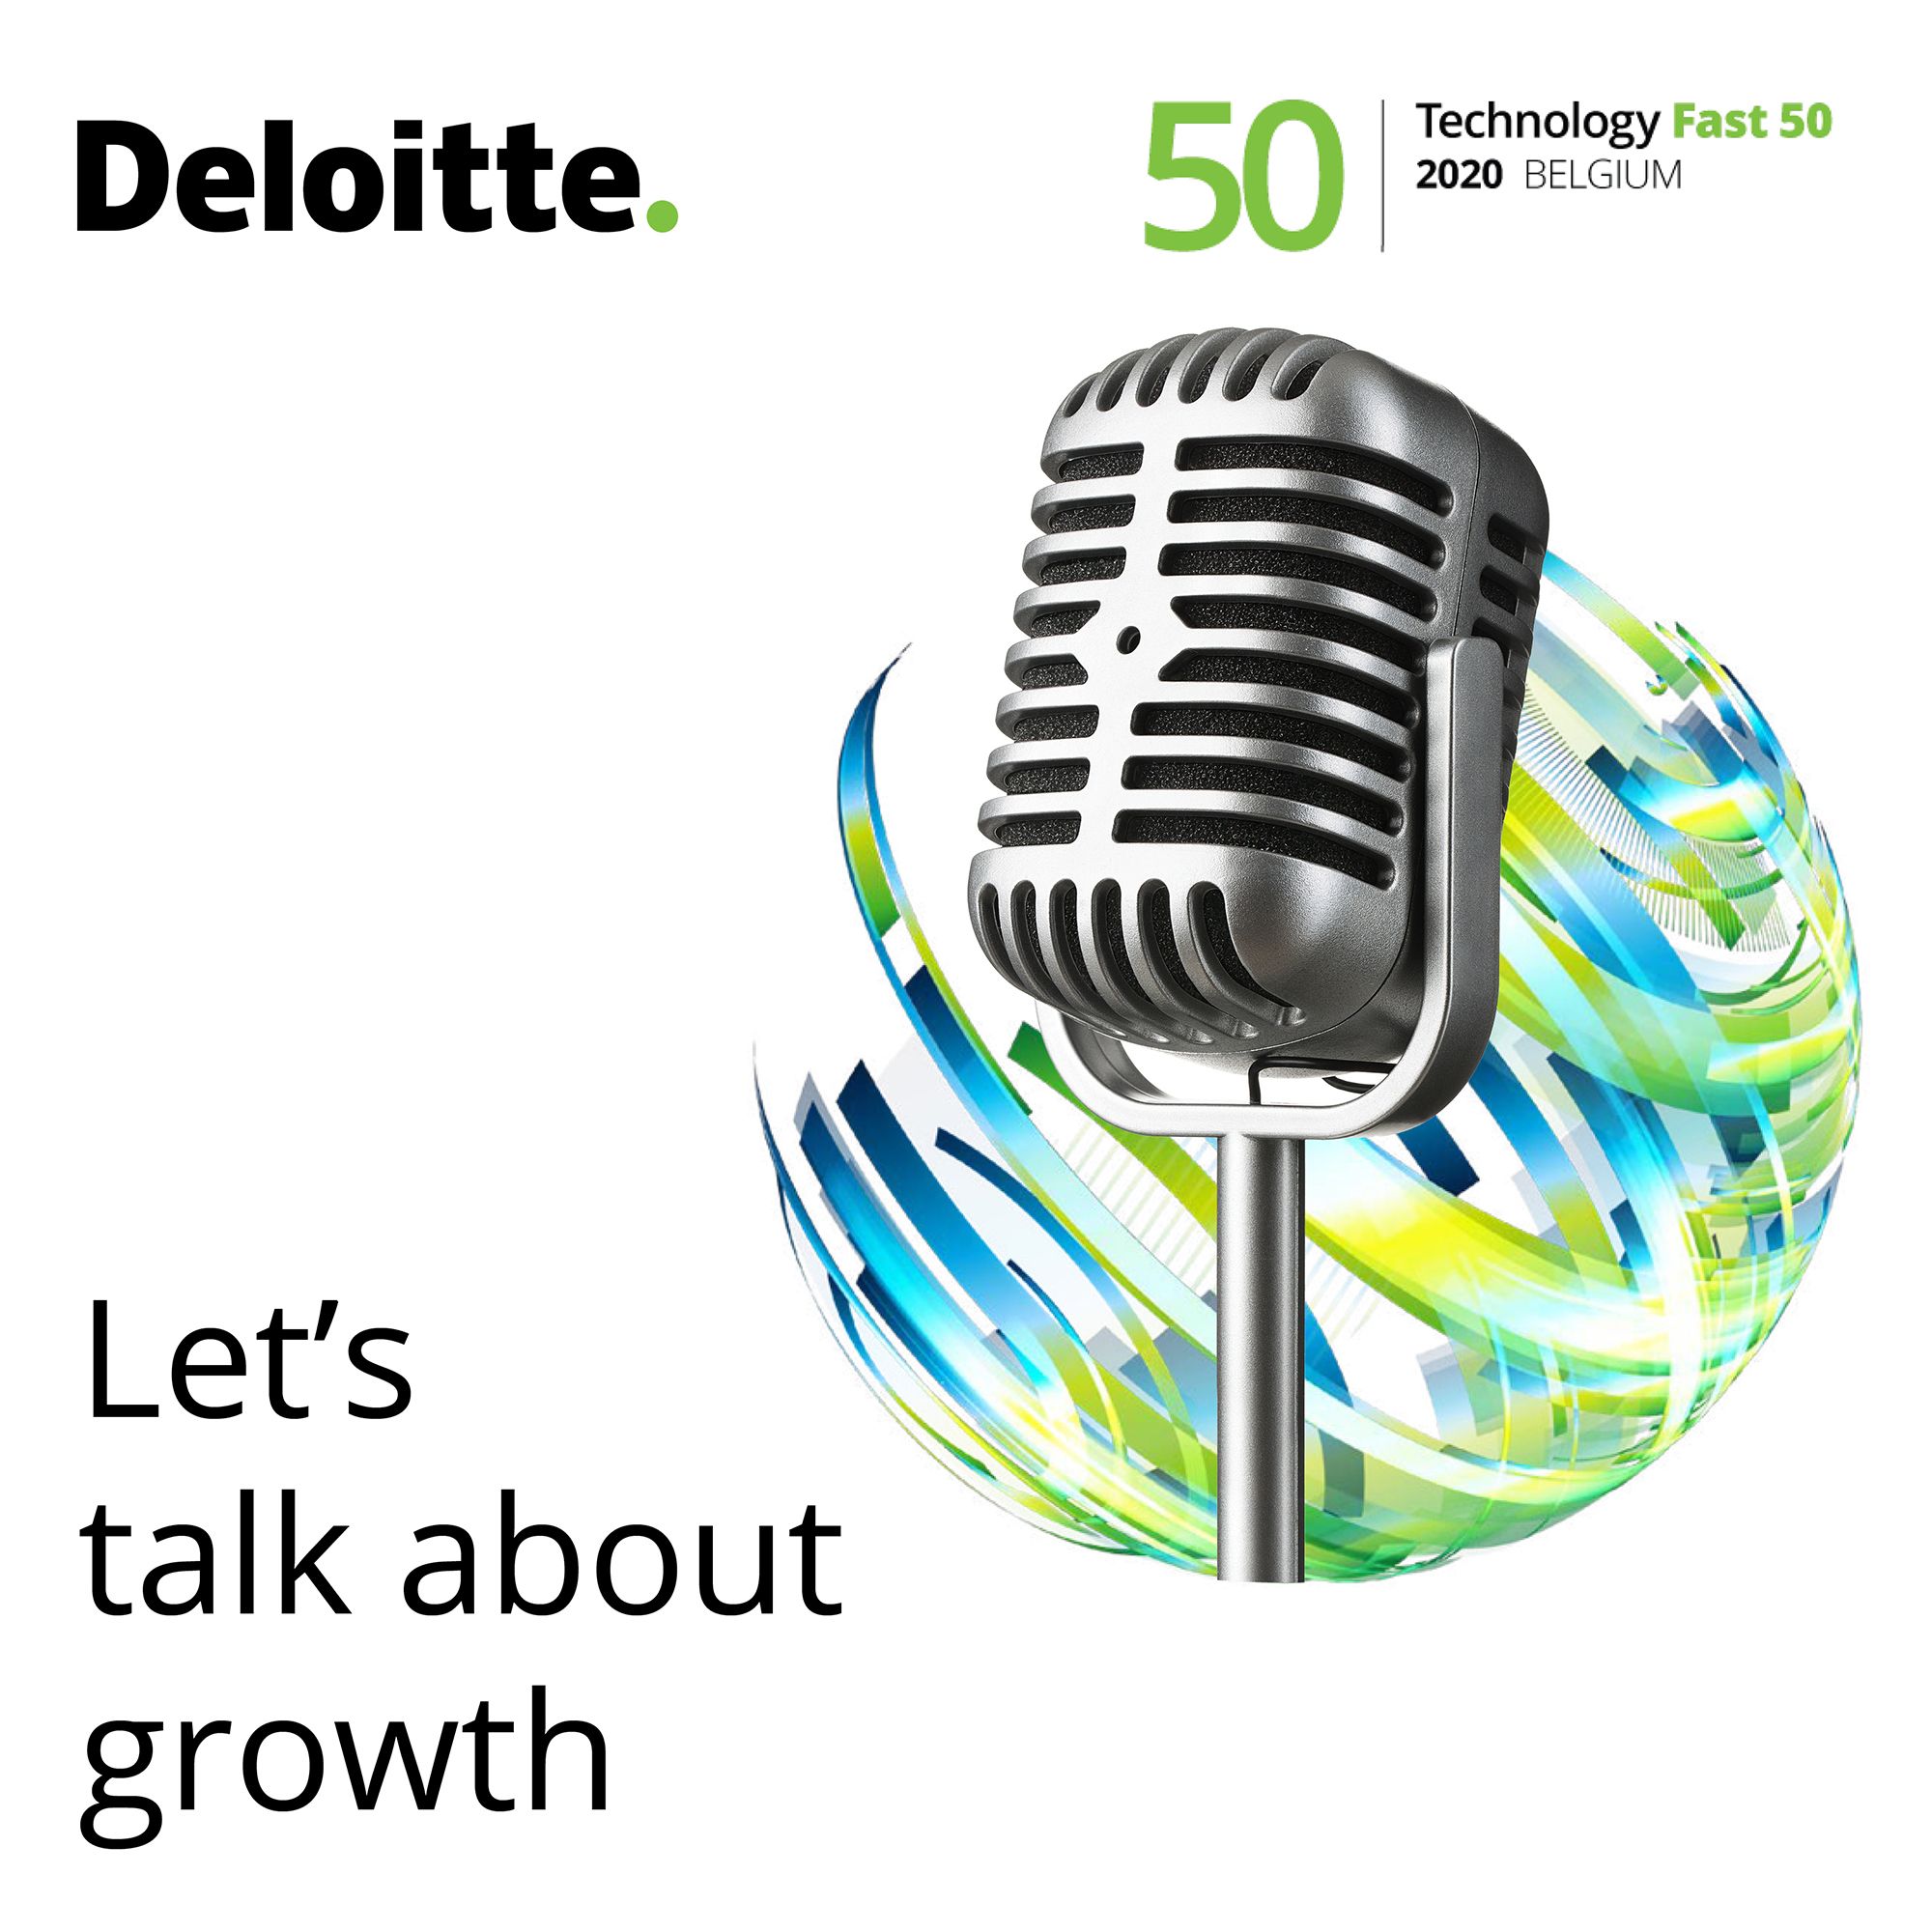 Fast 50 - Let's talk about growth (version FR)